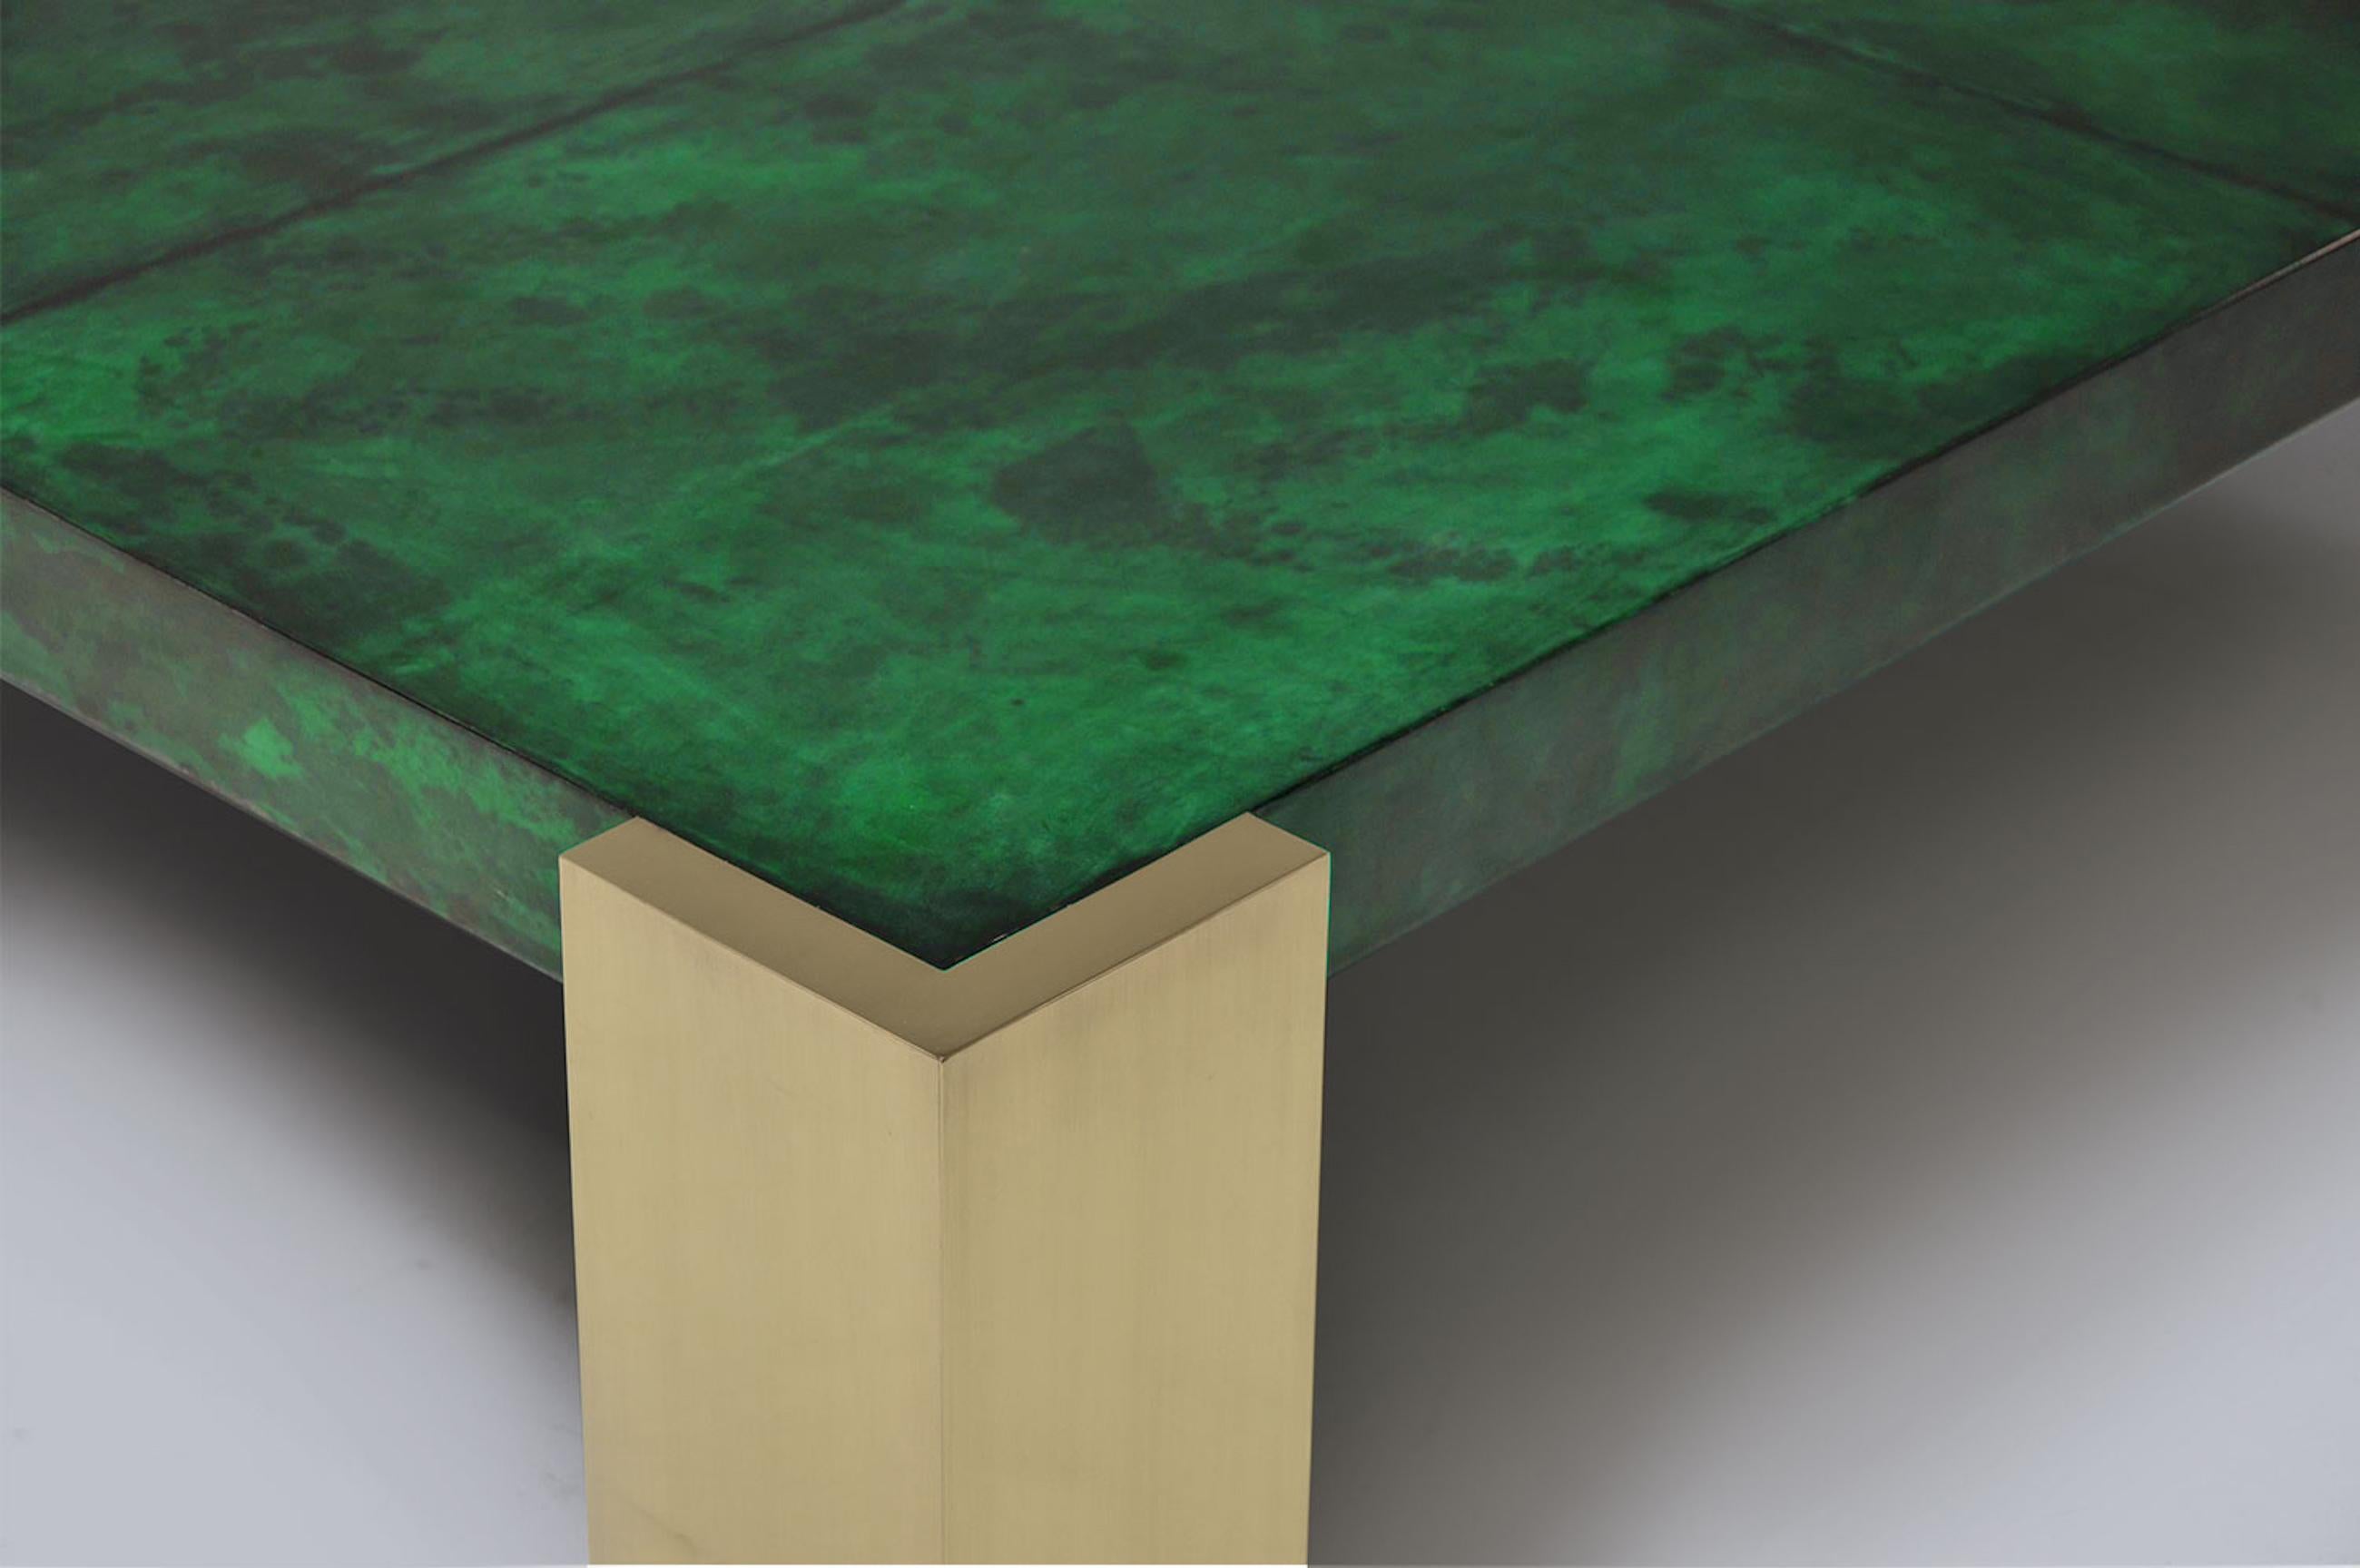 Coffee table in genuine emerald green parchment goatskin leather, sitting on four polished brass feet.
The top is made of several rectangular leather pieces placed side by side. Top is high gloss finished.
The geometric brass bases enhance the